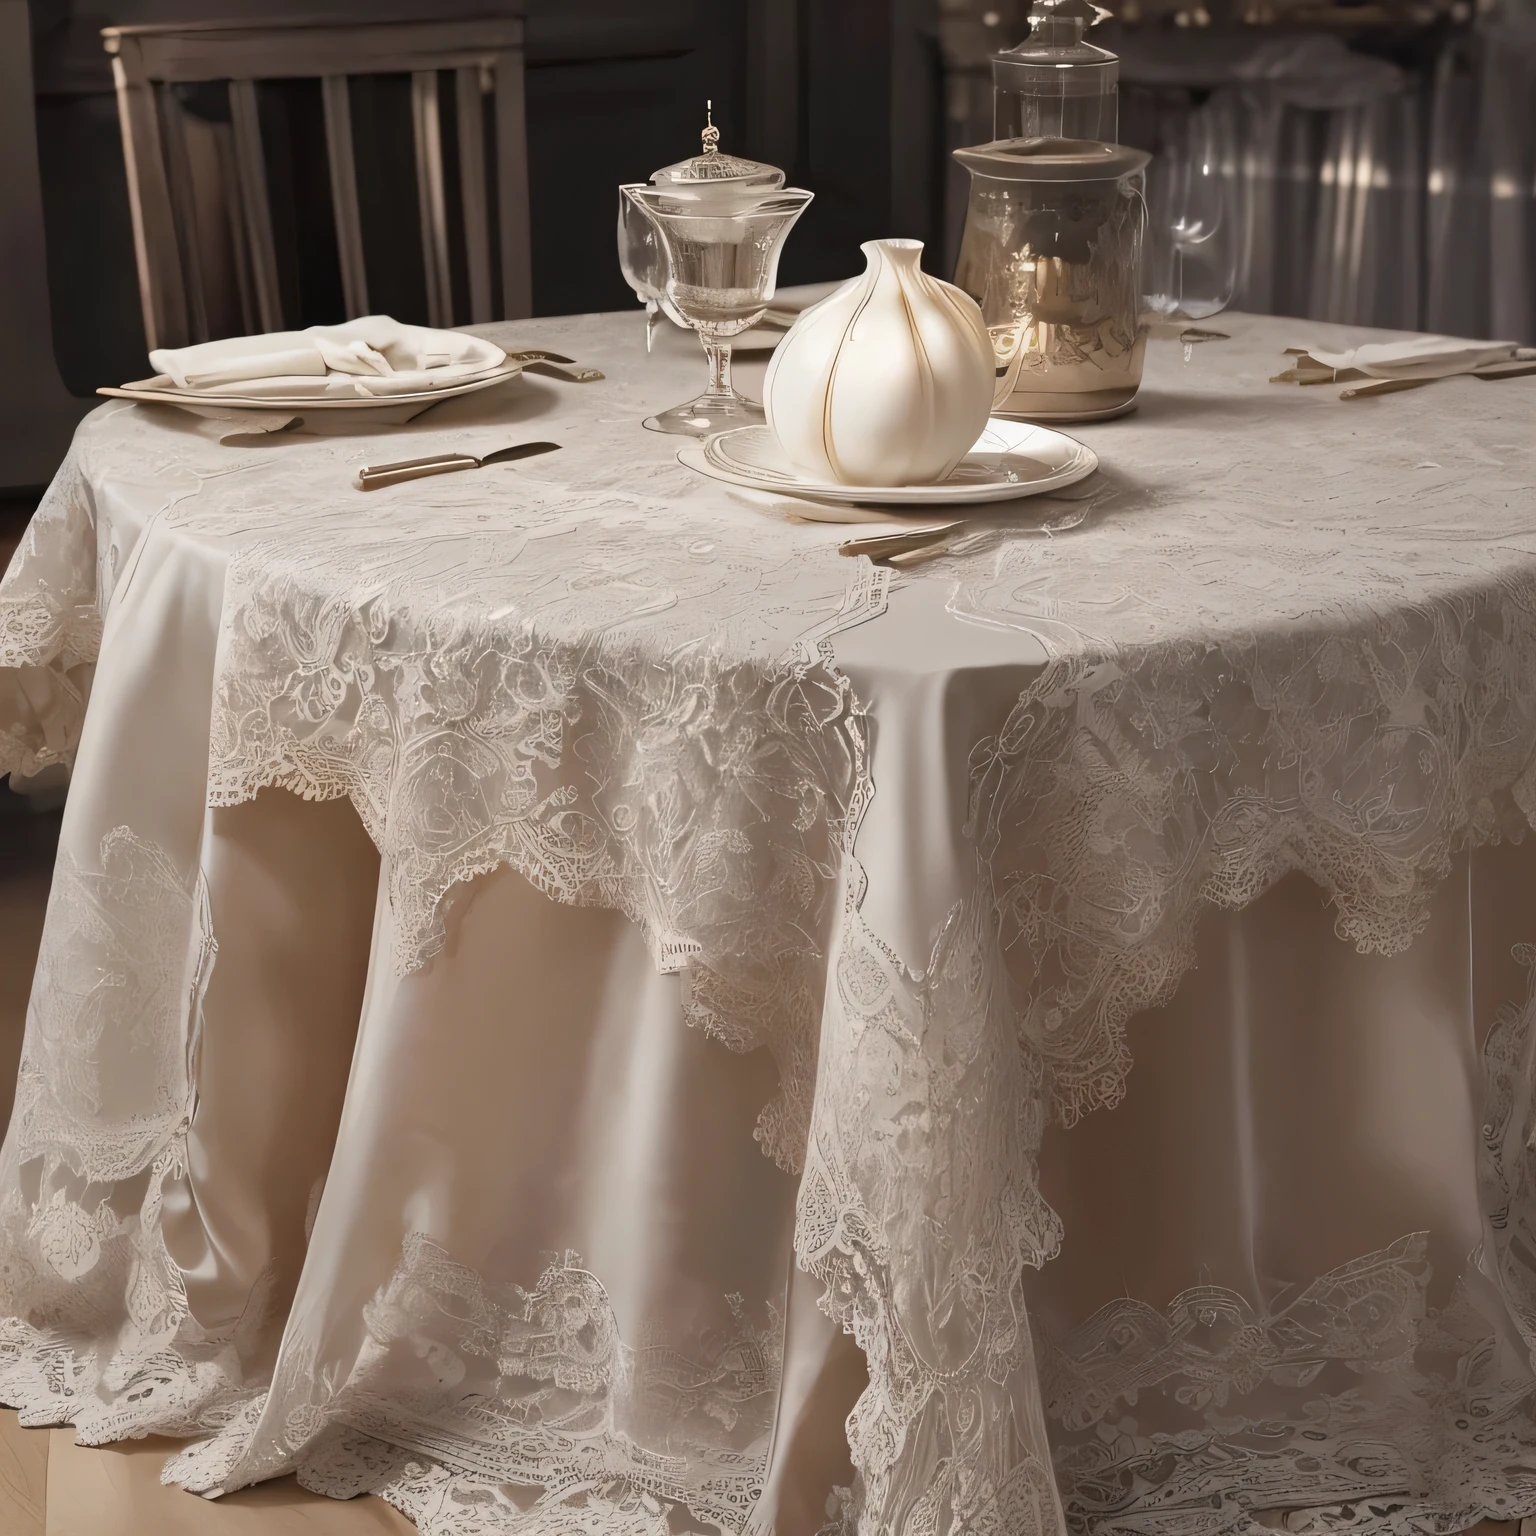 High-Resolution, Best Quality, Masterpiece: 1.5), white lace table tablecloth, Masterpiece, Intricate details, 1 black table, white tablecloth, elegant, delicate lace design, dim ambient lighting, soft shadows, detailed background, volumetric lighting, 3D rendering, close-up view.